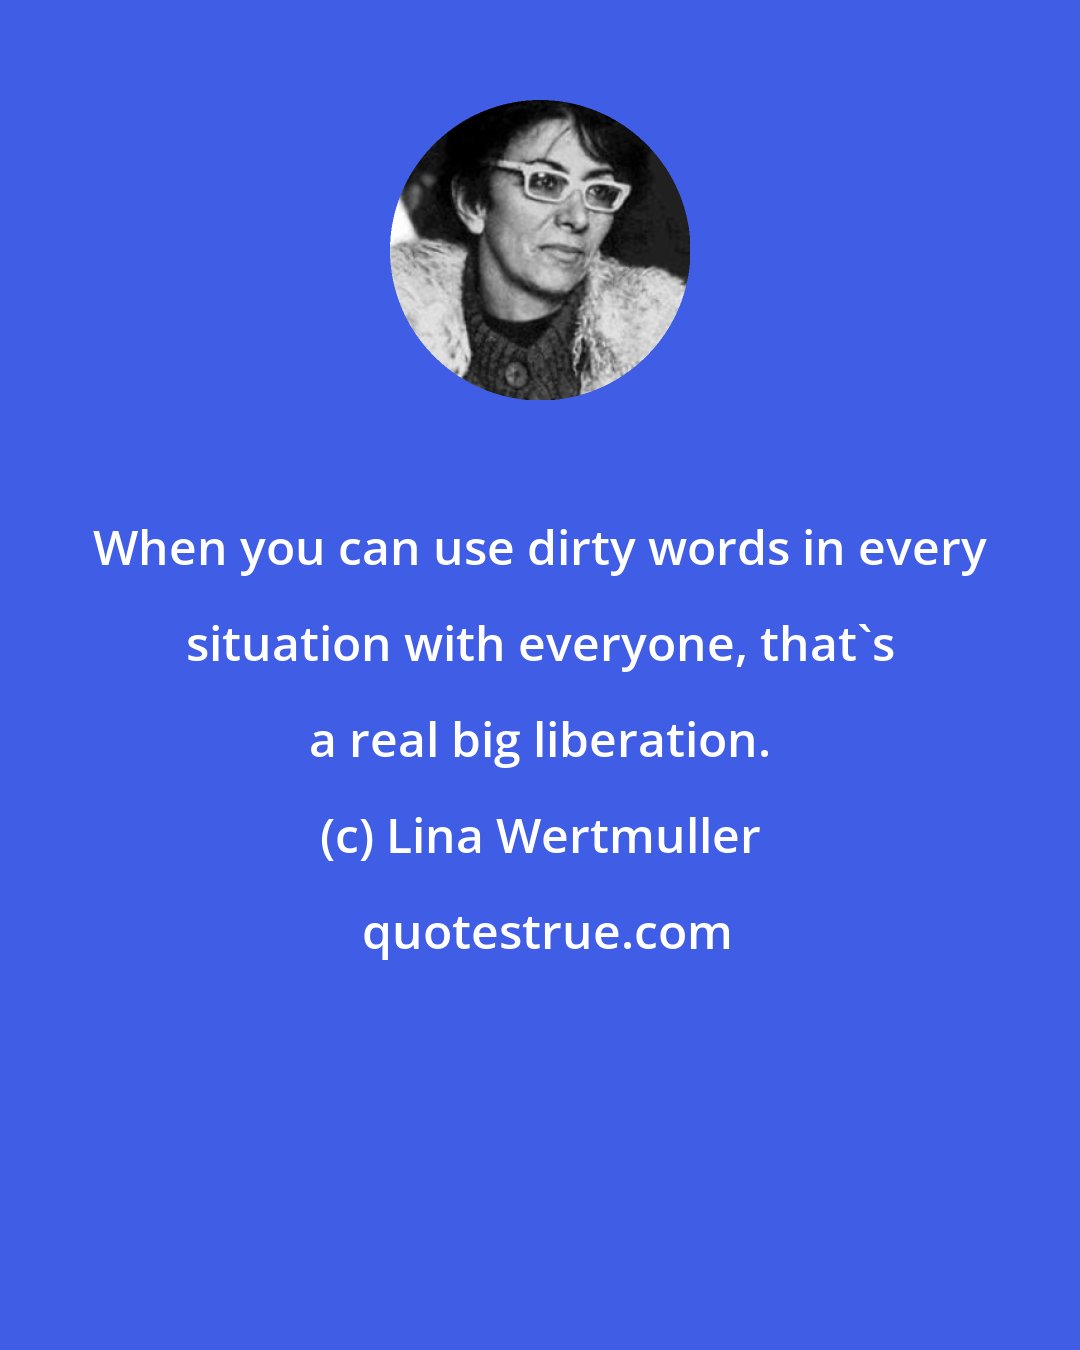 Lina Wertmuller: When you can use dirty words in every situation with everyone, that's a real big liberation.